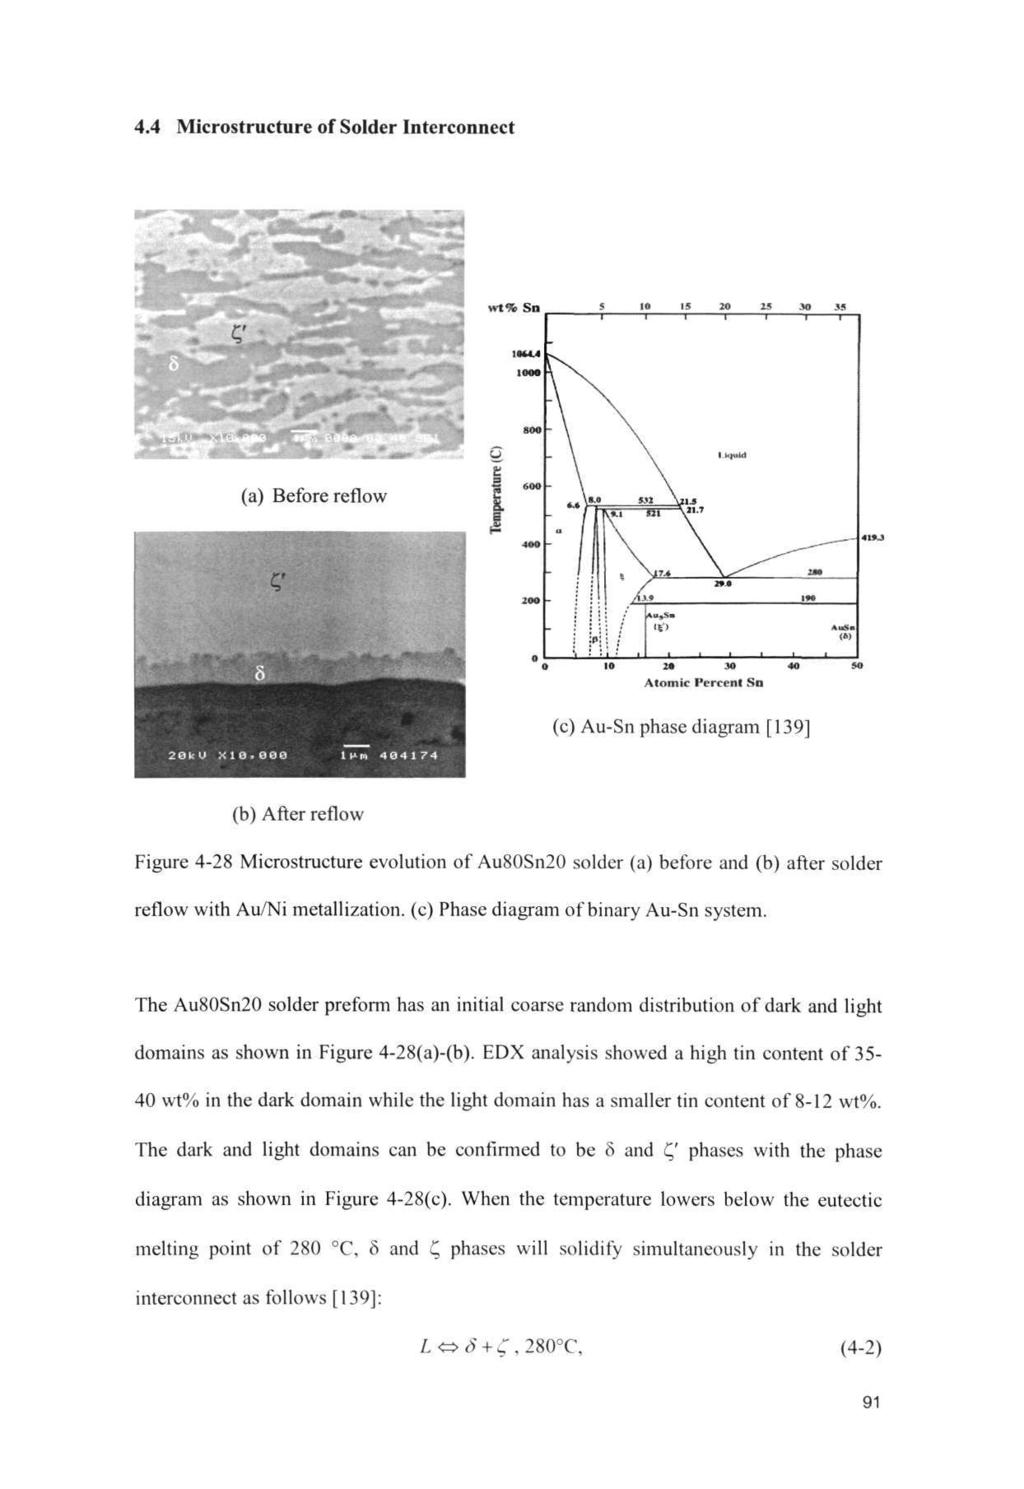 4.4 Microstructure of Solder Interconnect (b) After reflow Figure 4-28 Microstructure evolution of Au80Sn20 solder (a) before and (b) after solder reflow with Au/Ni metallization, (c) Phase diagram